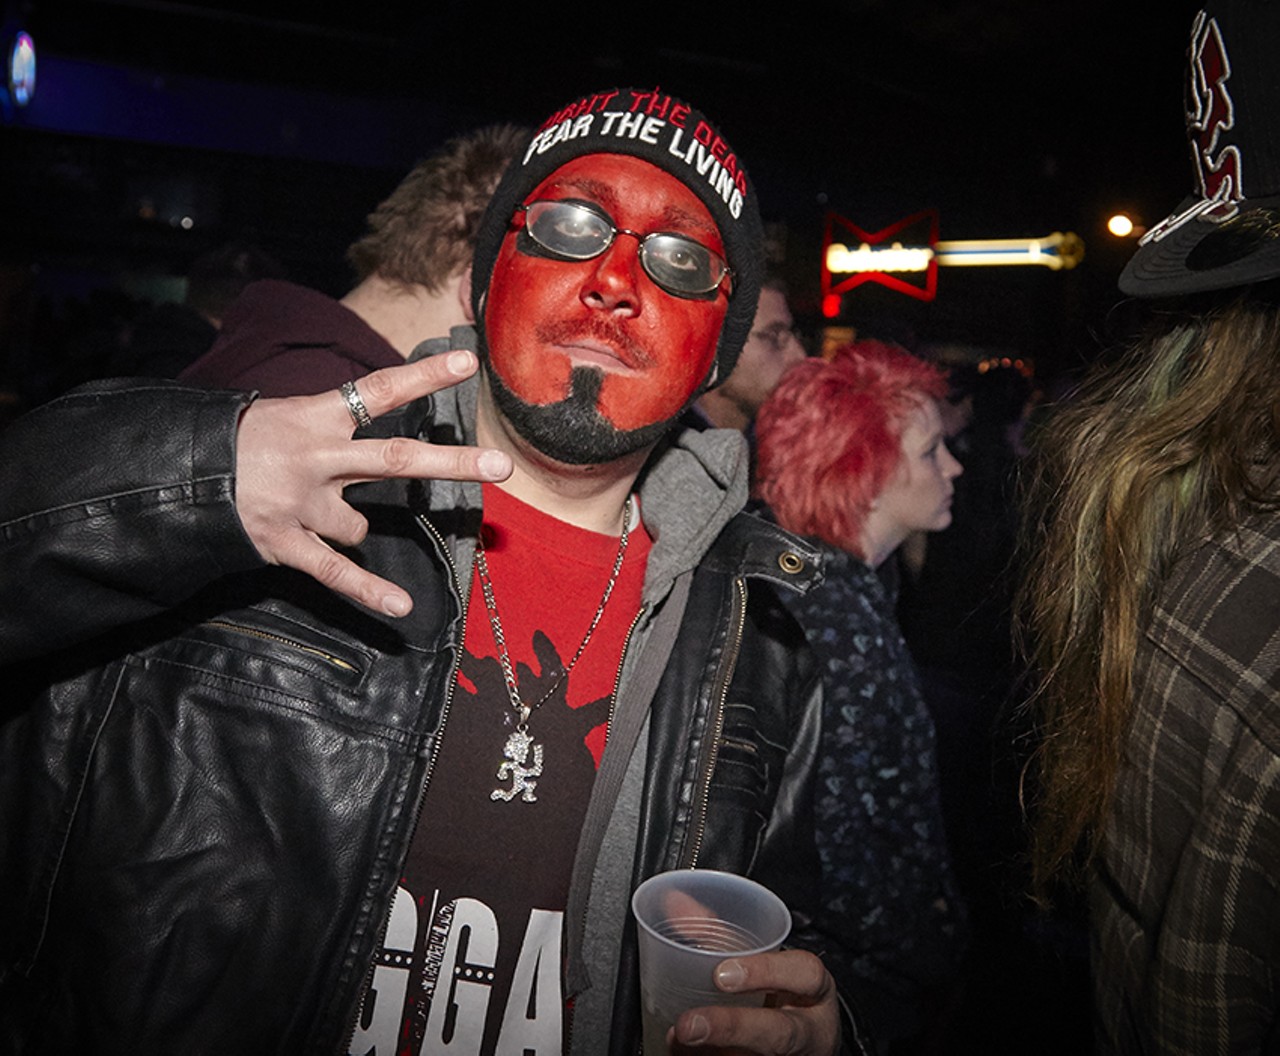 Brad, a red-faced juggalo.